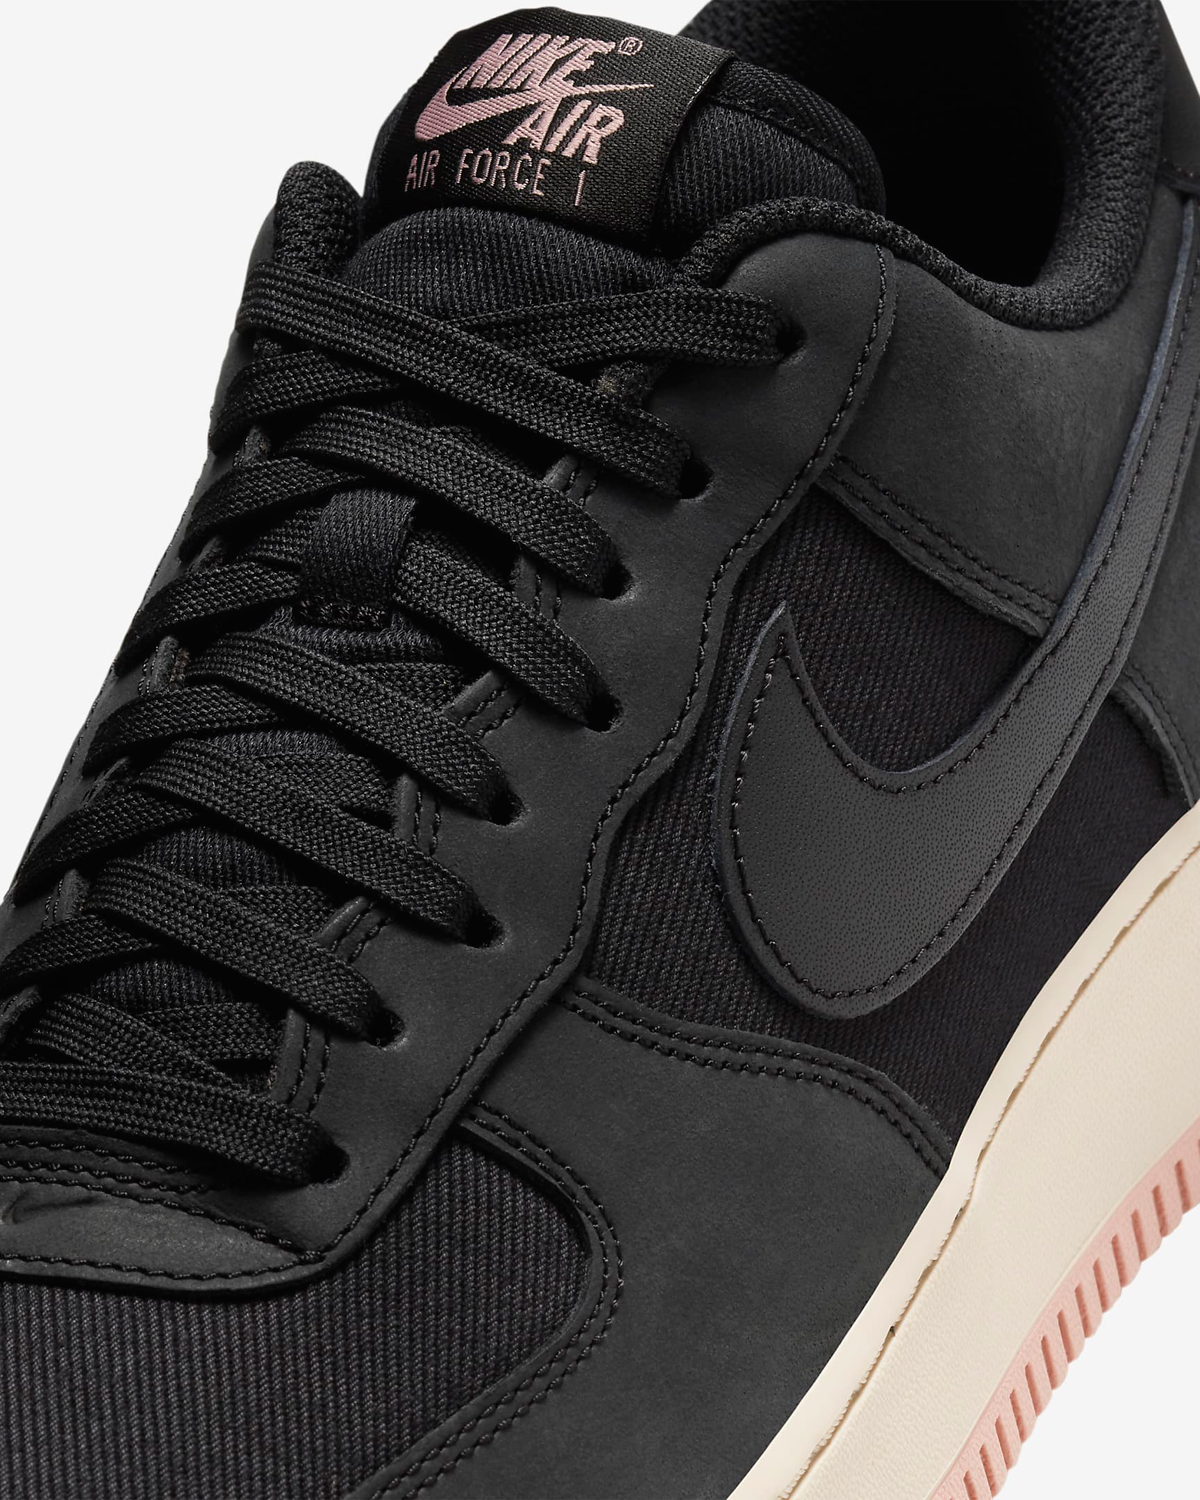 Nike-Air-Force-1-Low-LX-Black-Red-Stardust-Release-Date-7